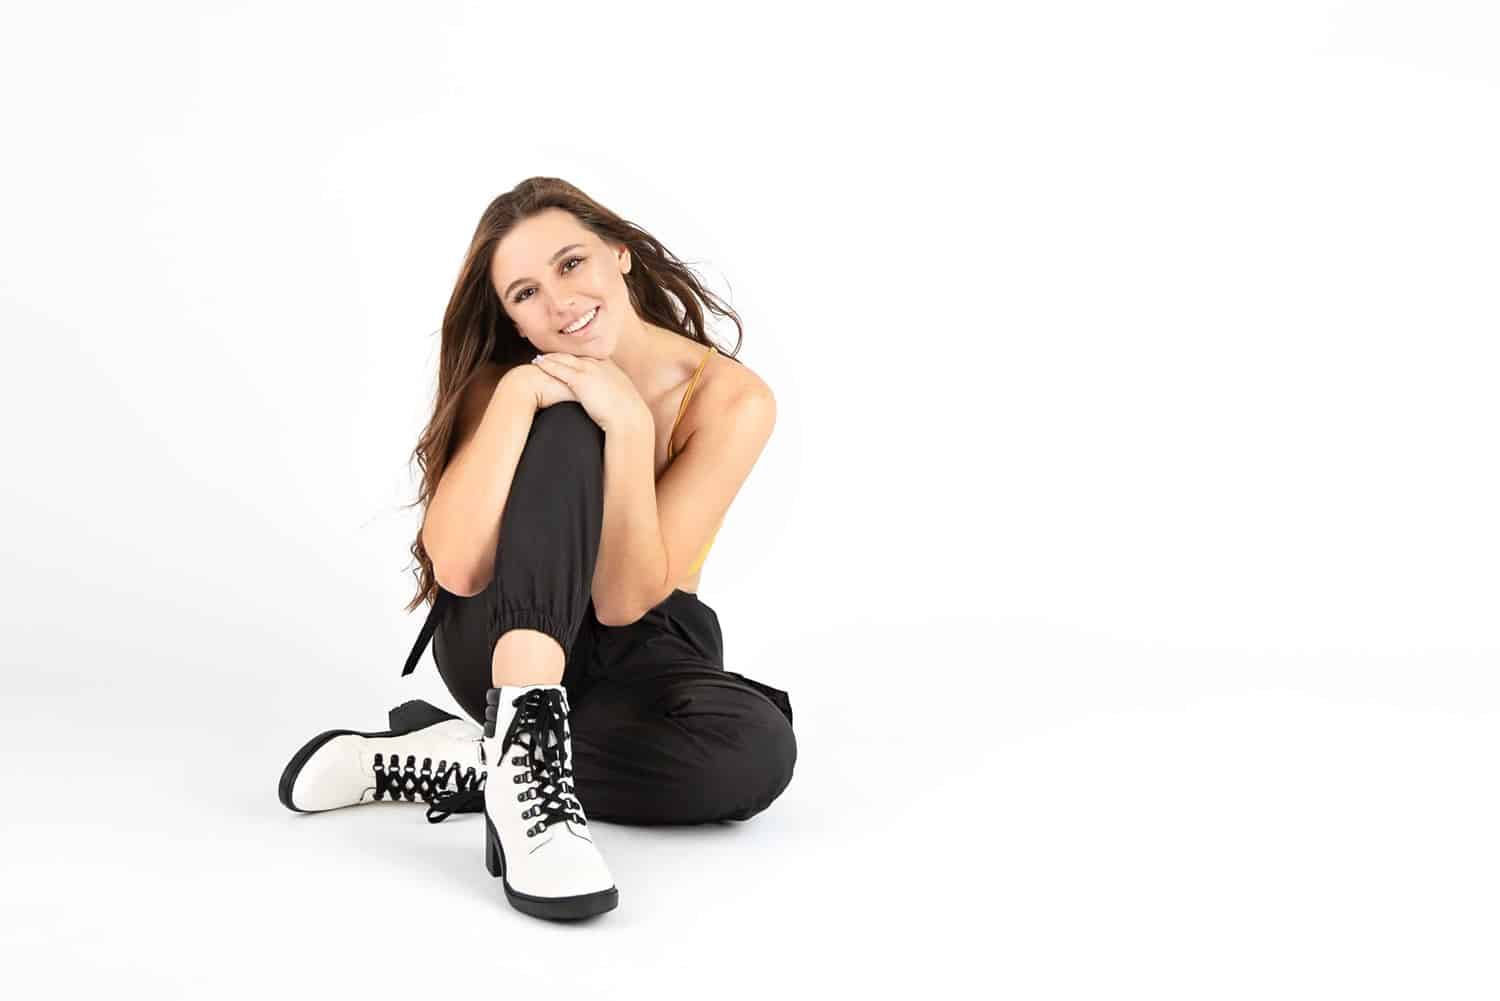 A girl takes senior photos in white boots and black pants.